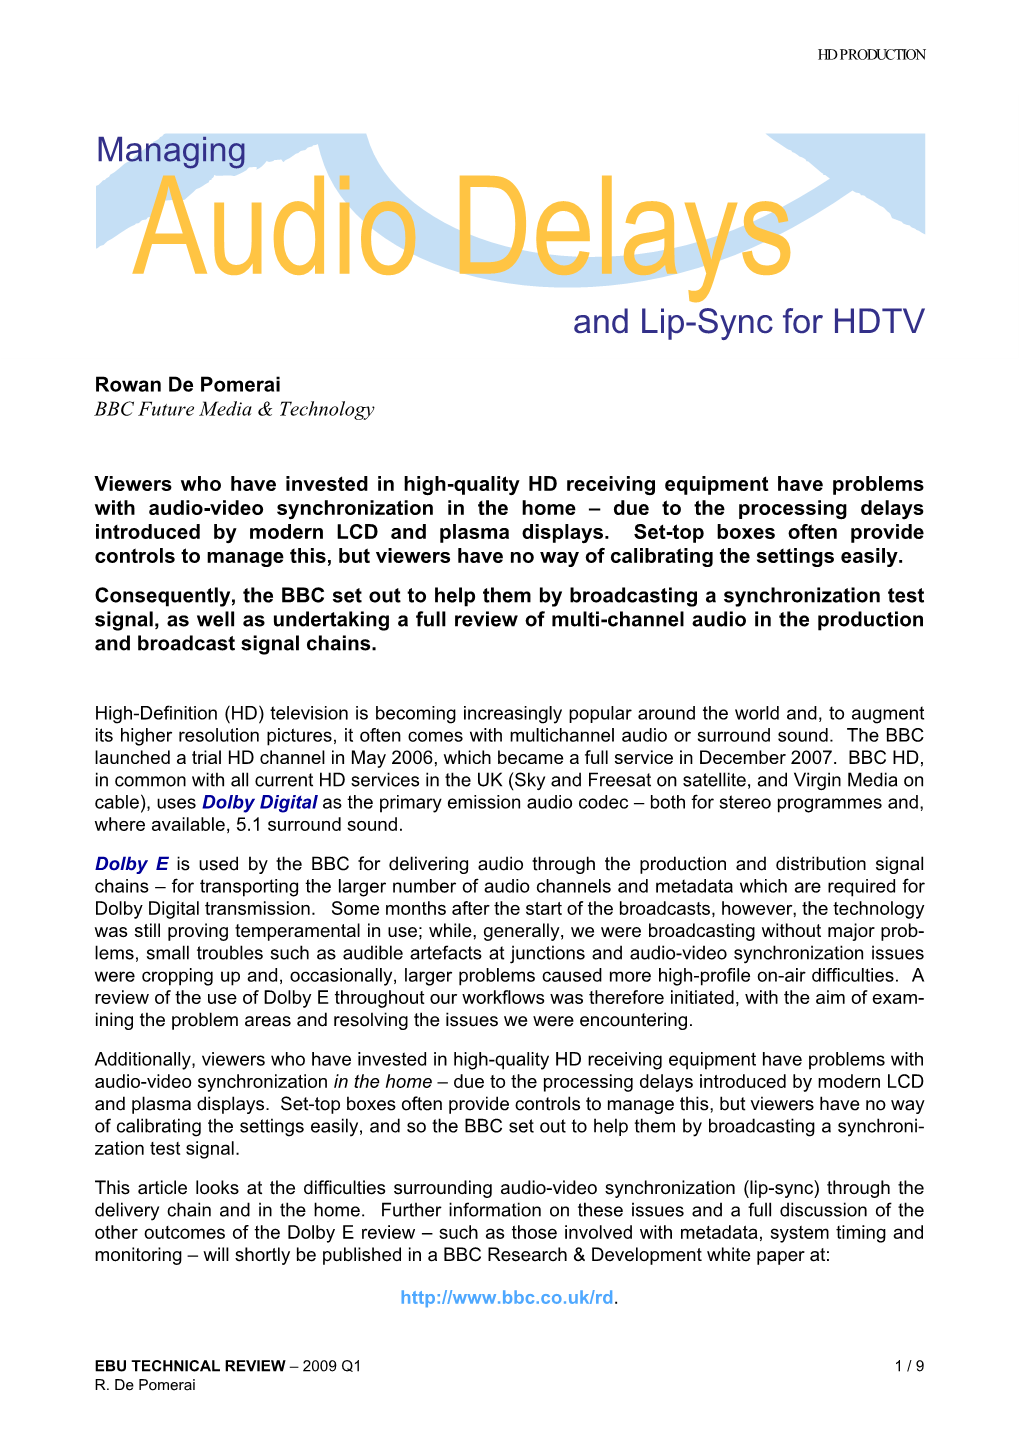 Managing Audio Delays and Lip-Sync for HDTV